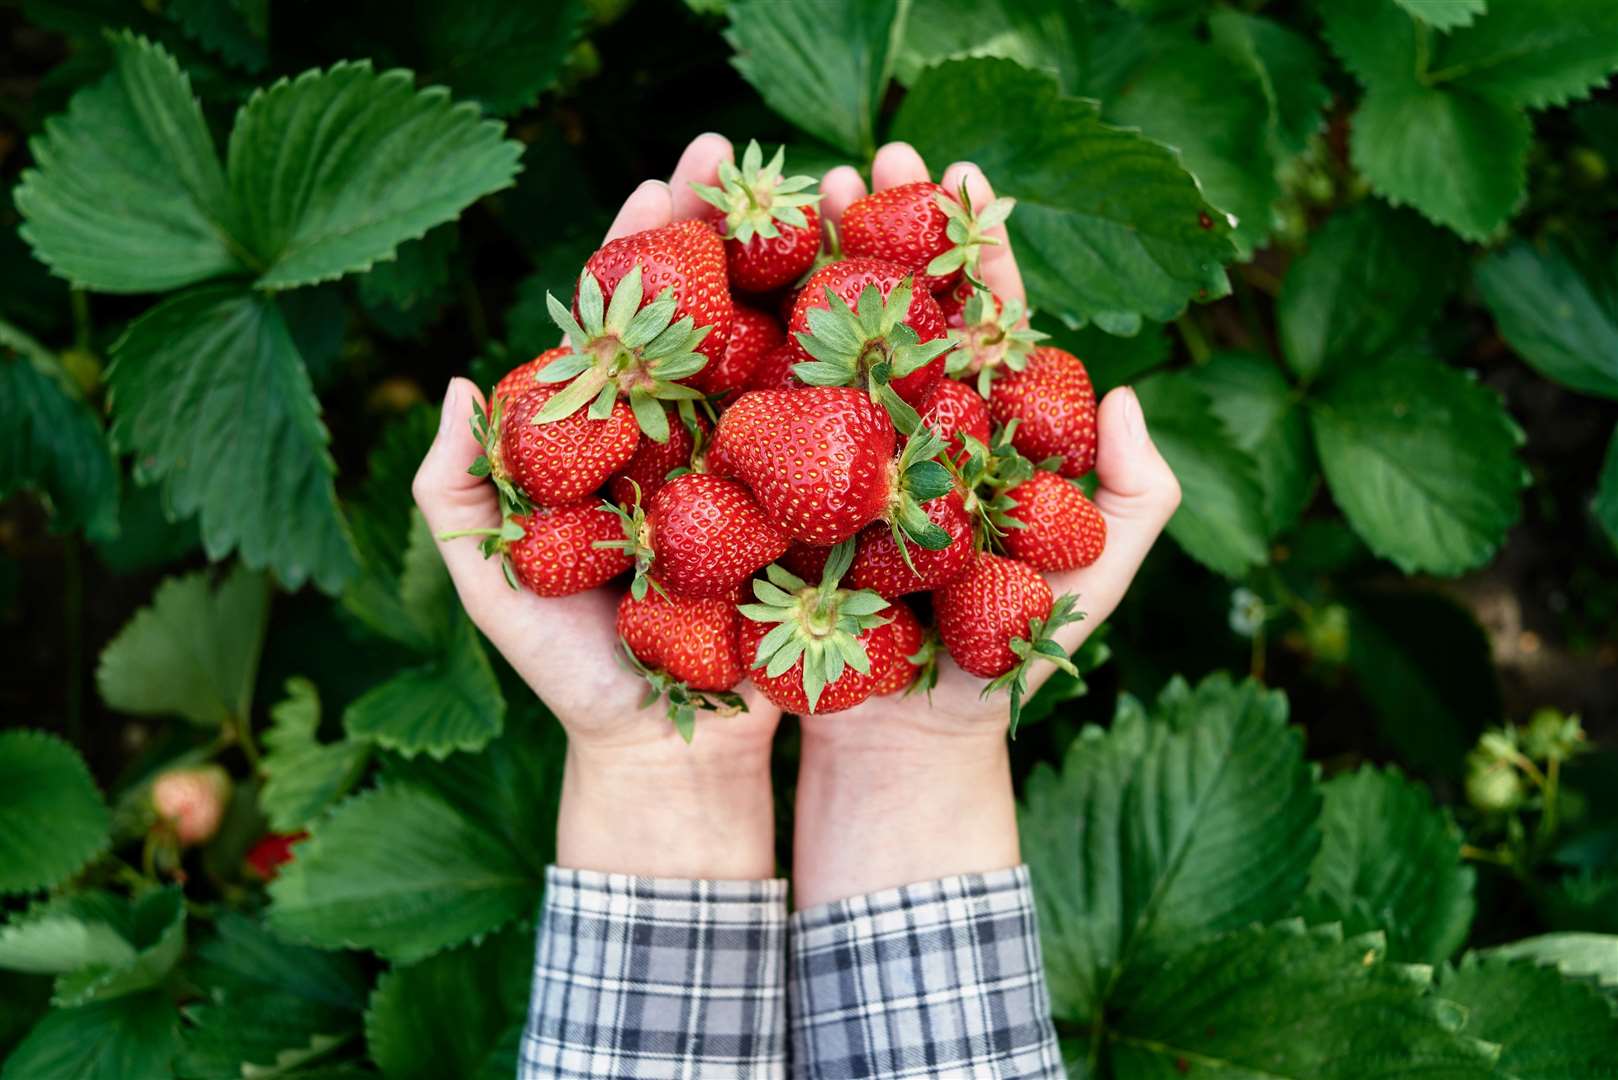 A punnet of strawberries can be treble the price of a supermarket own-brand pizza. Image: iStock.